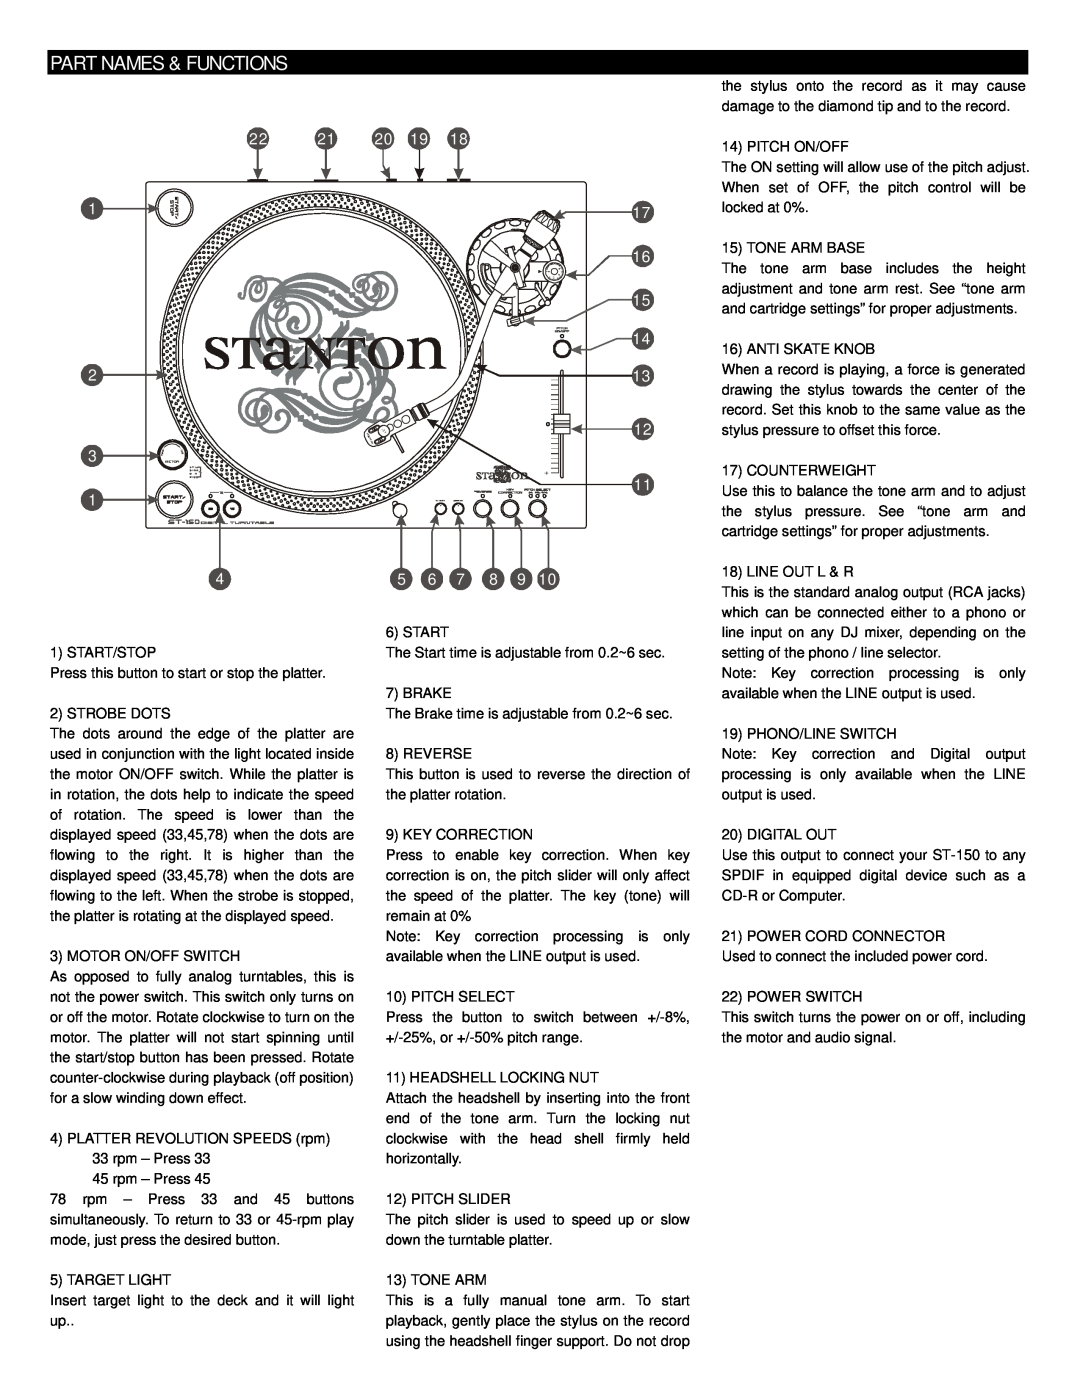 Stanton ST-150 owner manual Part Names & Functions 